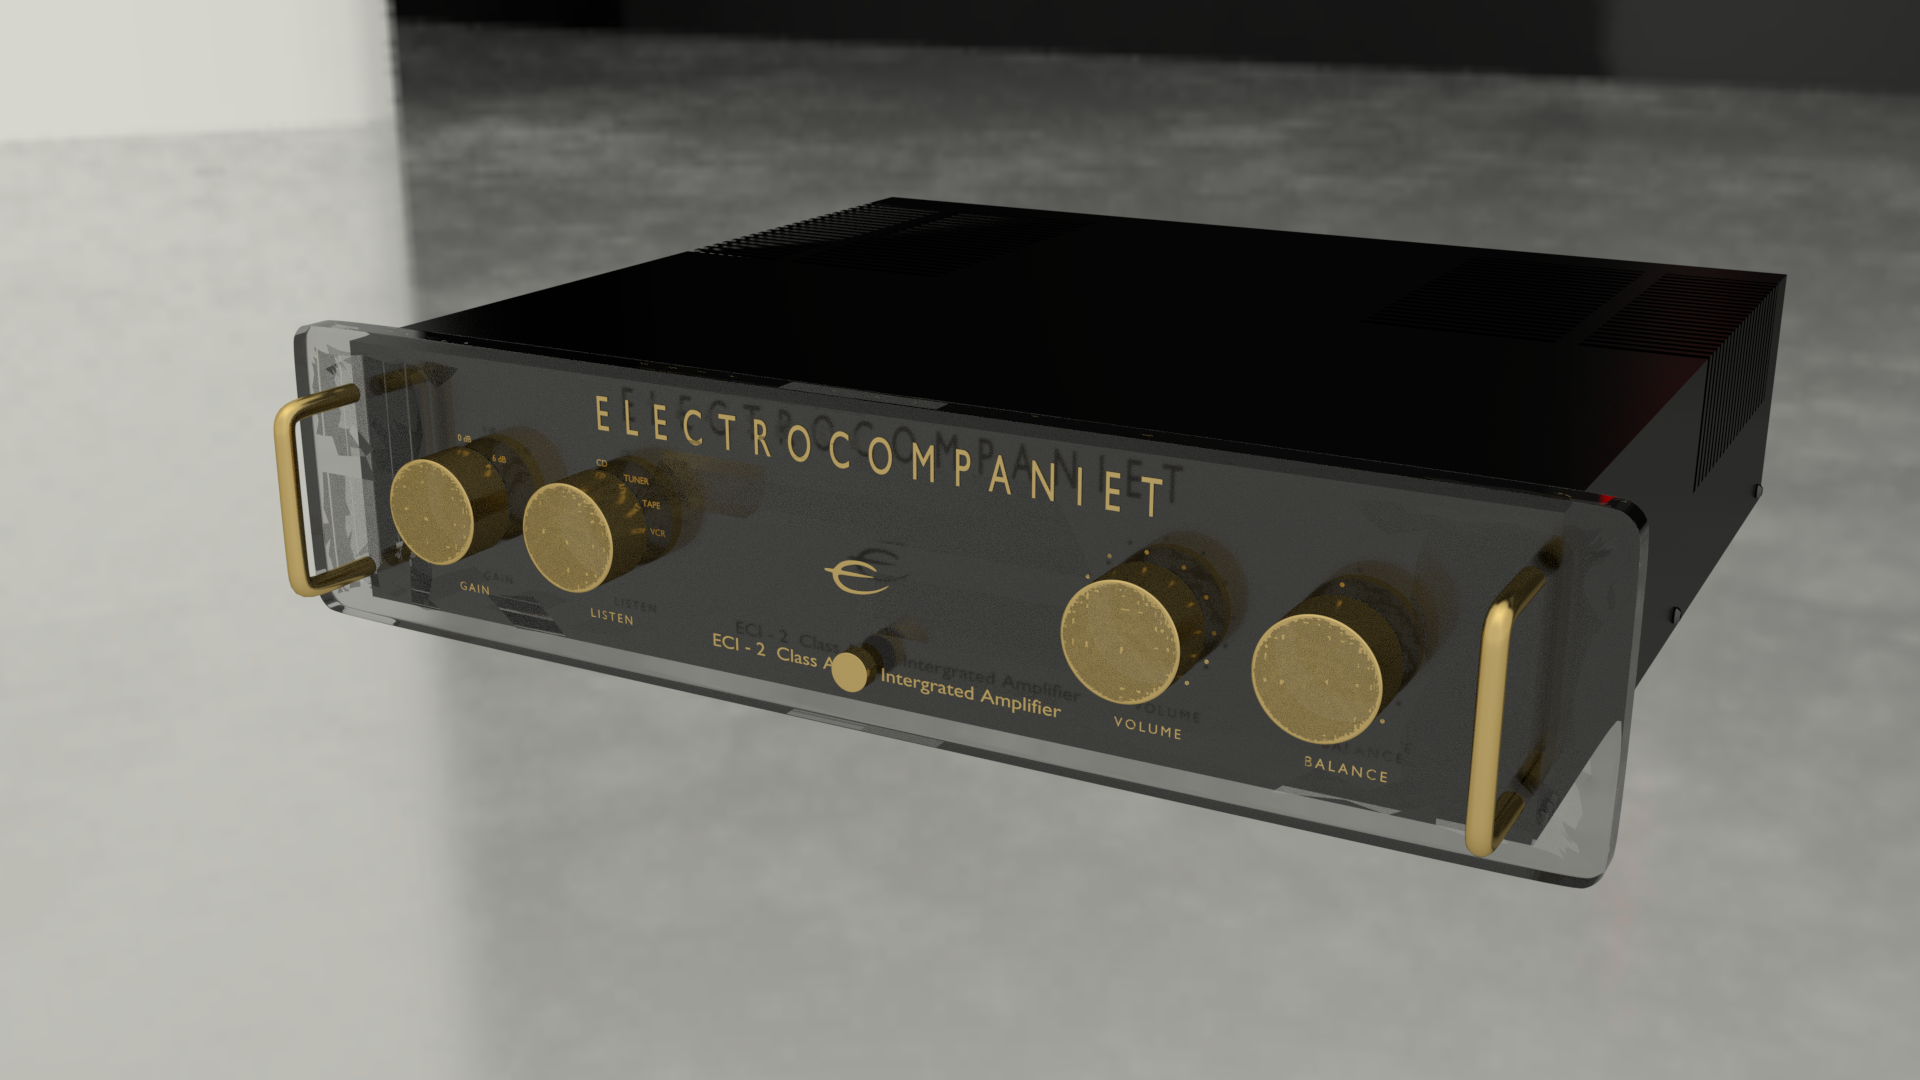 Eci2 Audio amplifier preview image 1